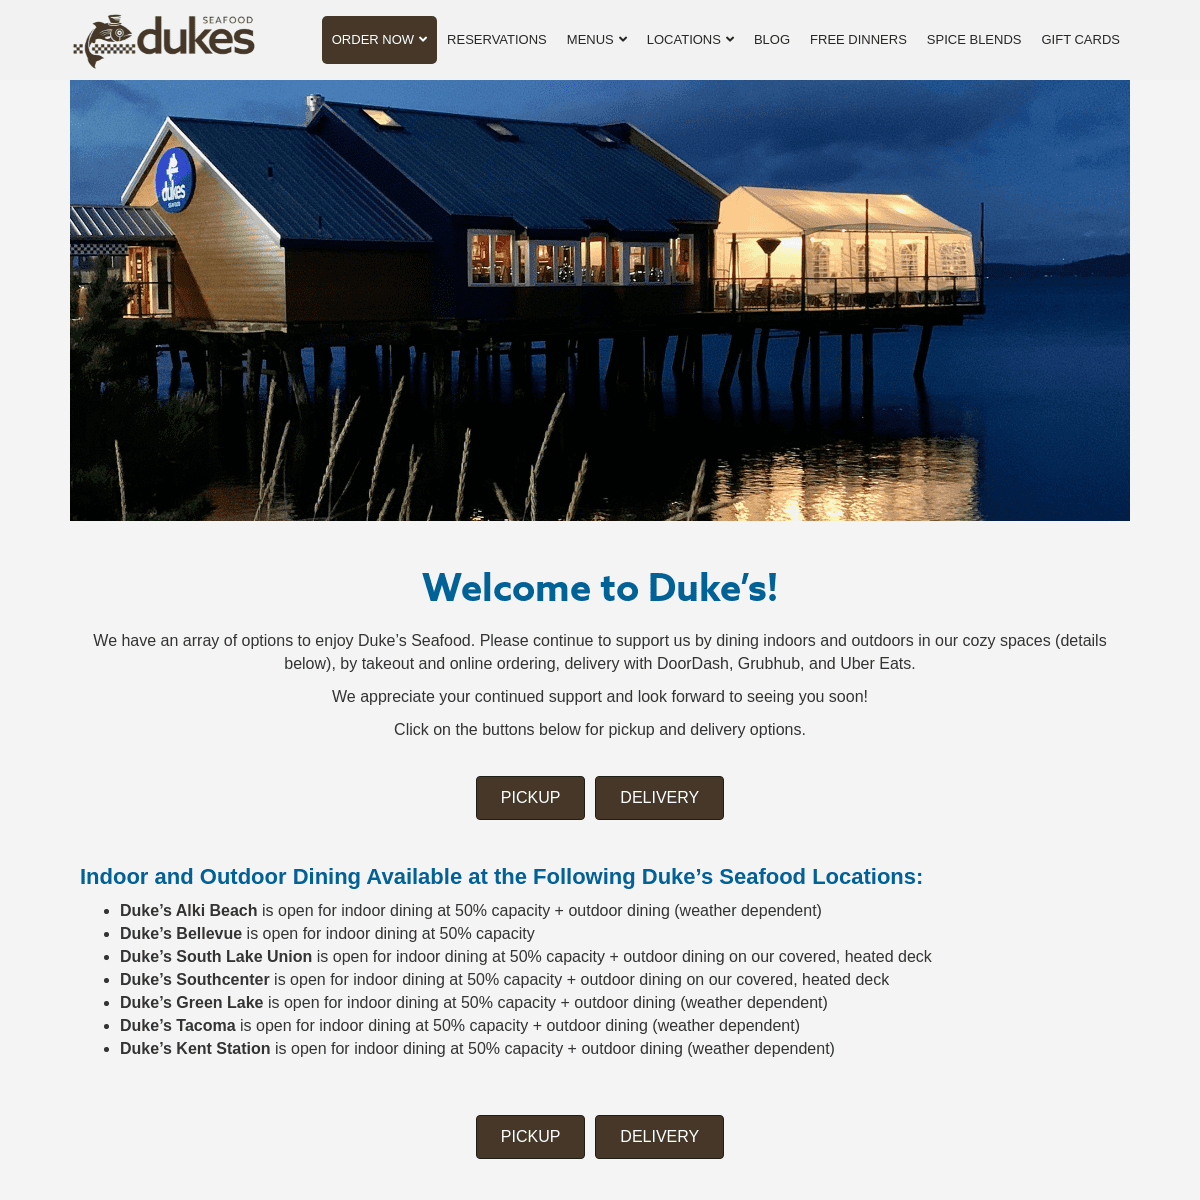 A complete backup of https://dukesseafood.com